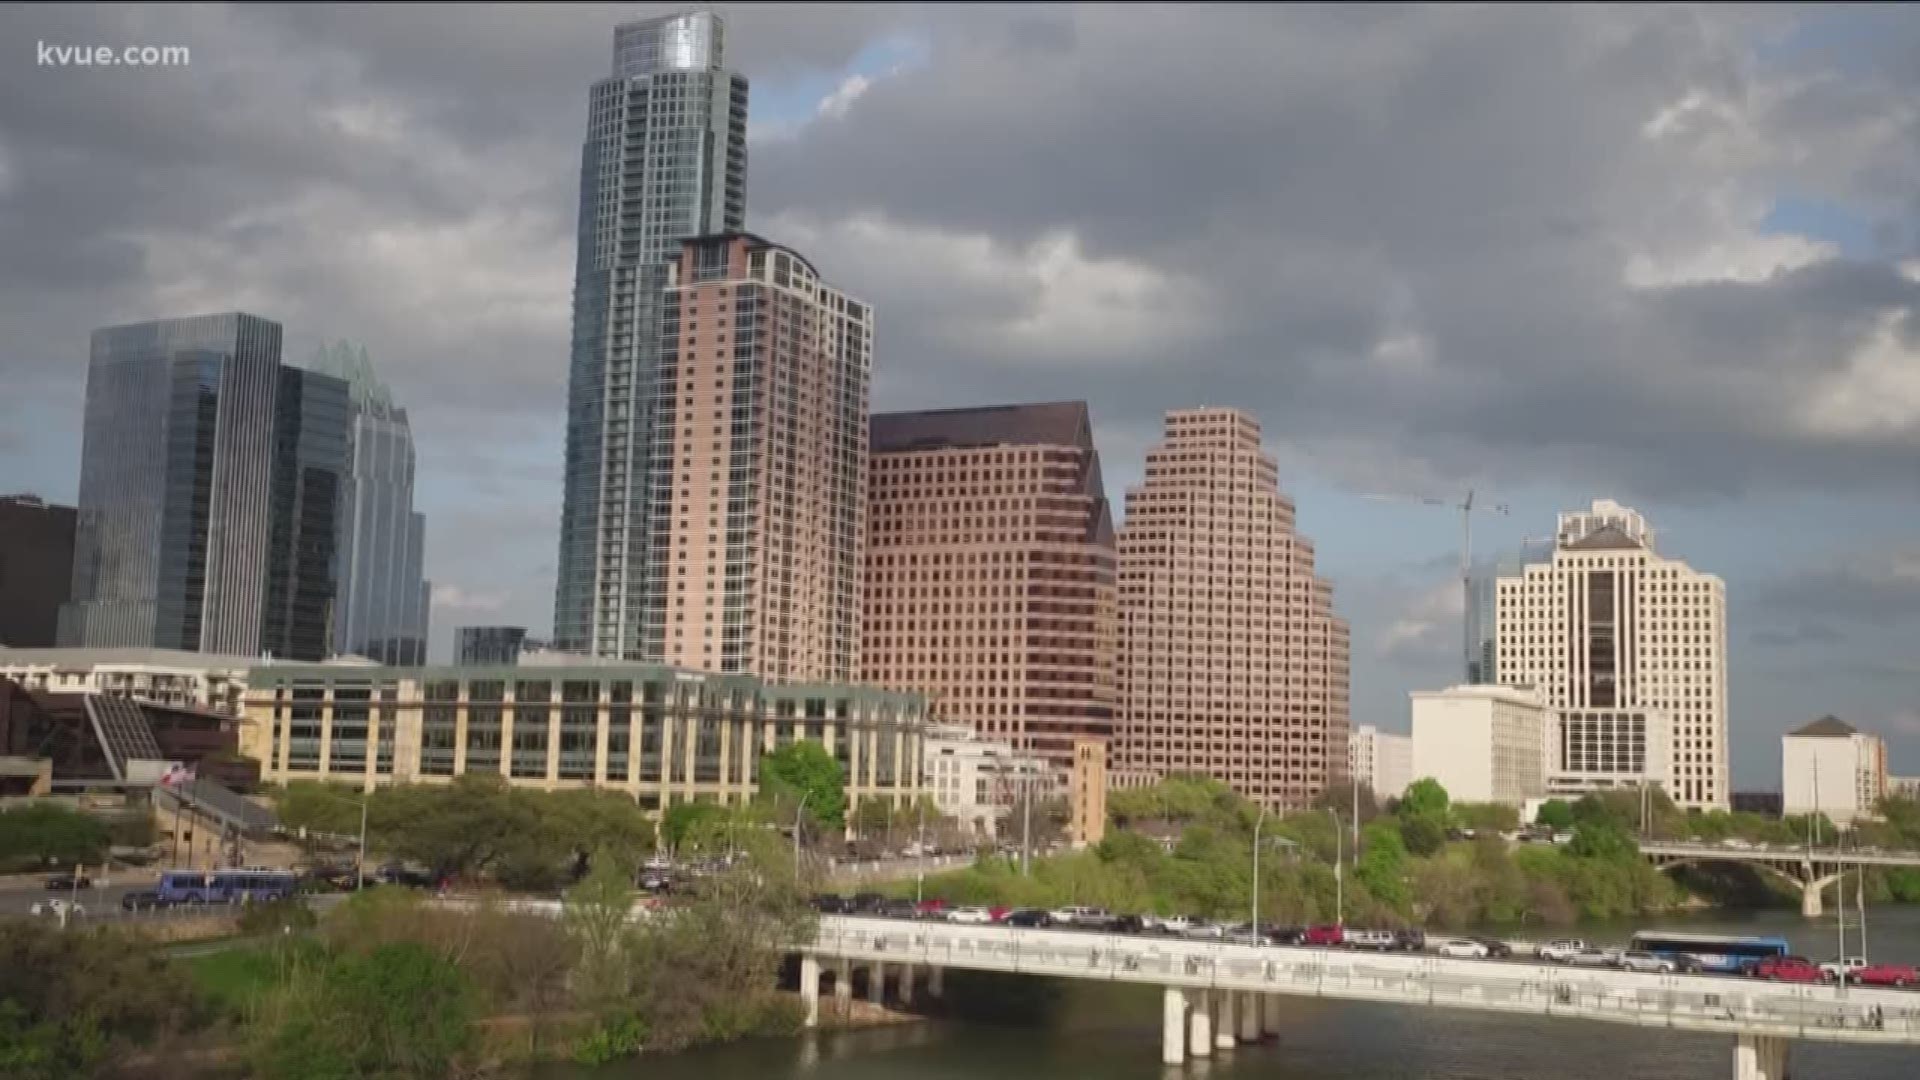 Austin is growing and the city's population is set to double by the year 2040. To track this growth, the Downtown Austin Alliance put out a new report focusing on how crucial the downtown district has become for the city's overall economy.